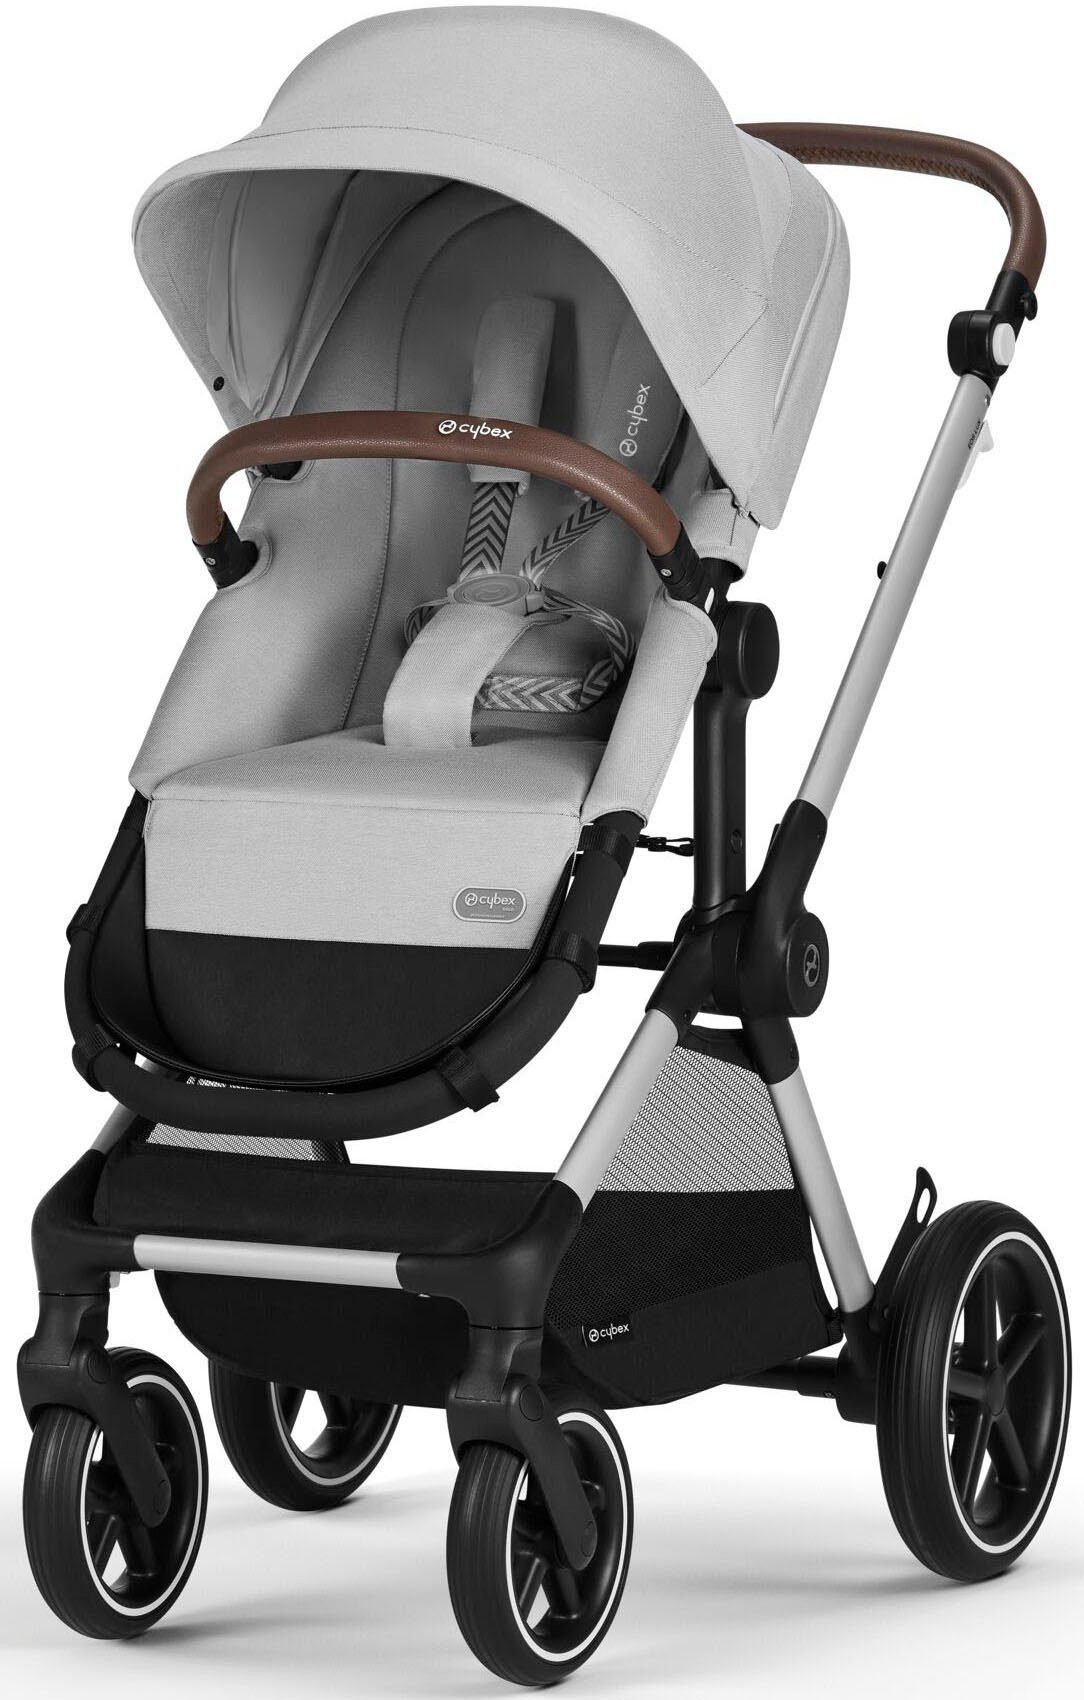 Cybex Kinder-Buggy Cybex Gold, Eos Lux